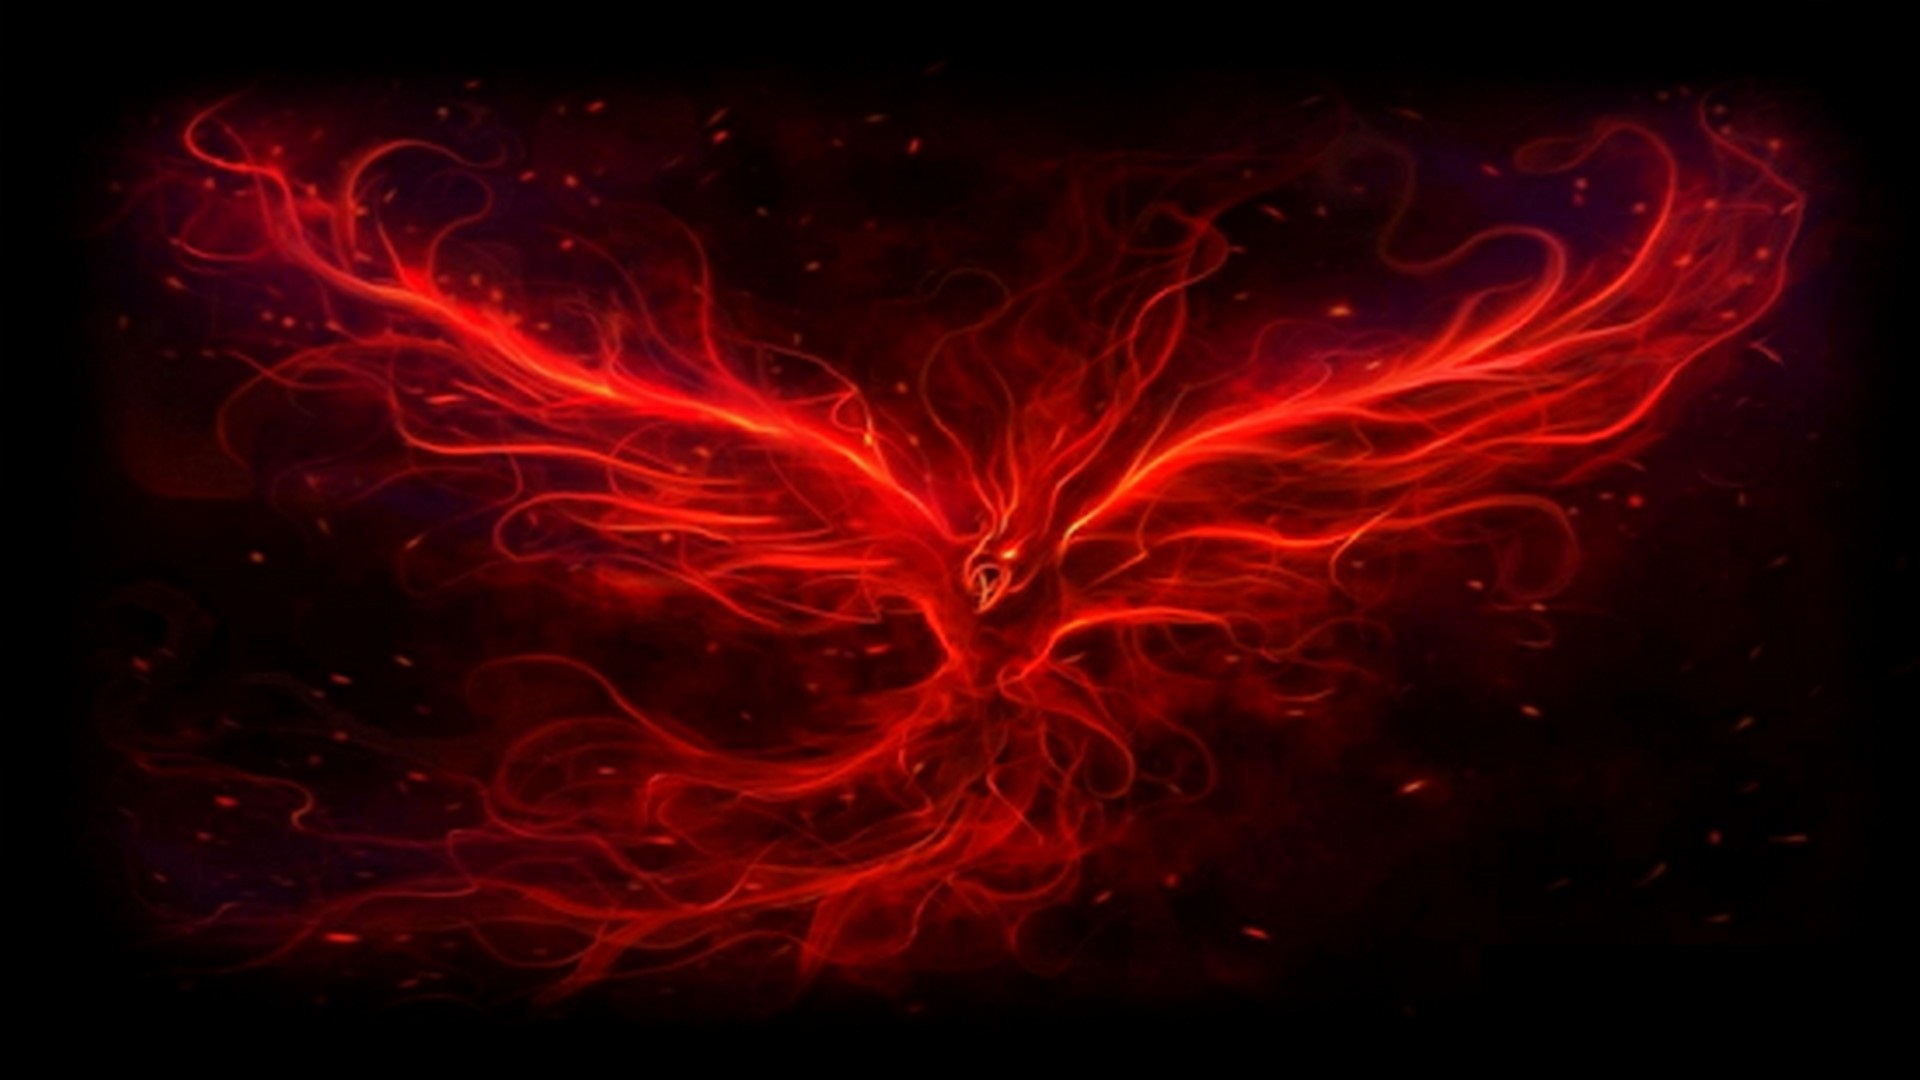 Dark Phoenix Wallpaper For Desktop with image resolution 1920x1080 pixel. You can use this wallpaper as background for your desktop Computer Screensavers, Android or iPhone smartphones